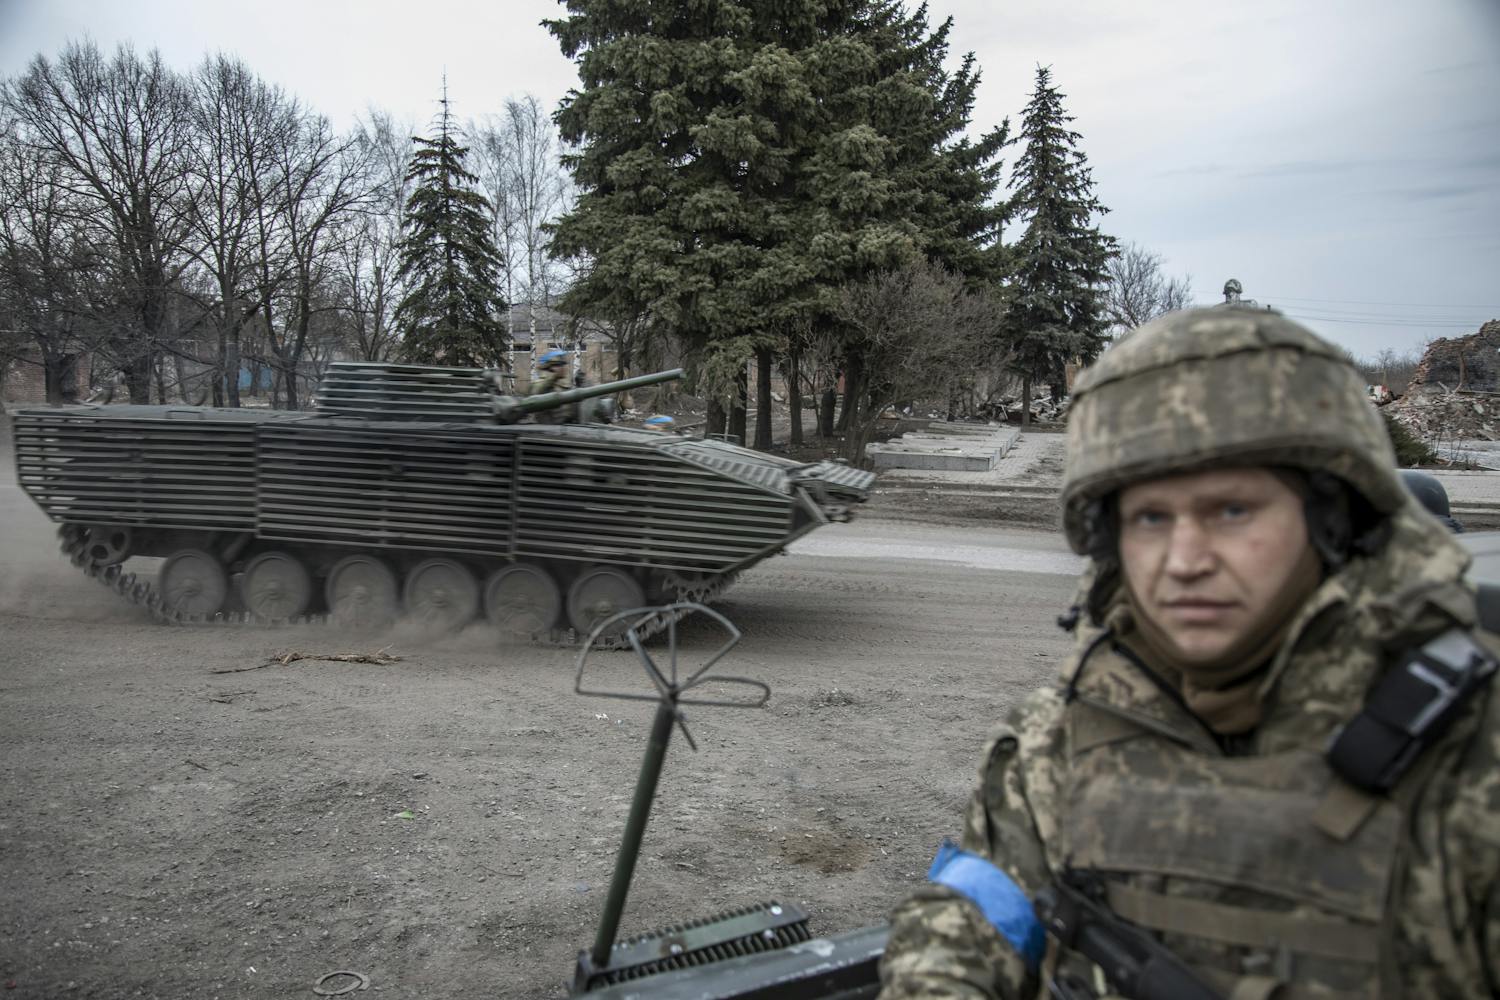 Russia seizes another village, and Ukraine has to face another blow